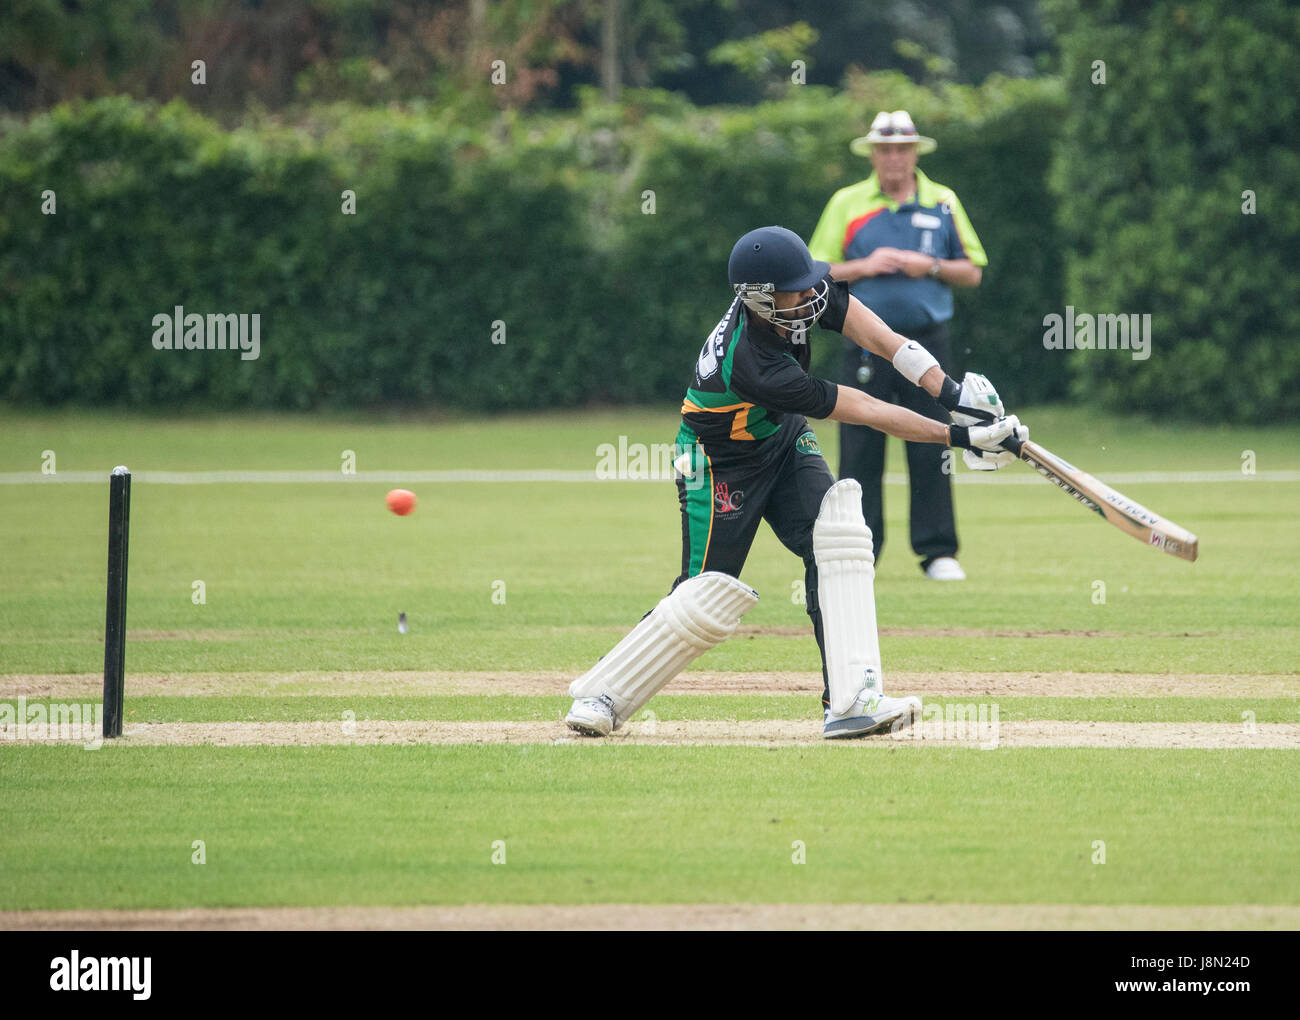 Brentwood, Essex, 29h May 2017. Shahbaz Khan bats at T20 Cricket match Brentwood Buccaneers vs Harold Wood at the Old County Ground, Brentwood, Credit: Ian Davidson/Alamy Live News Stock Photo